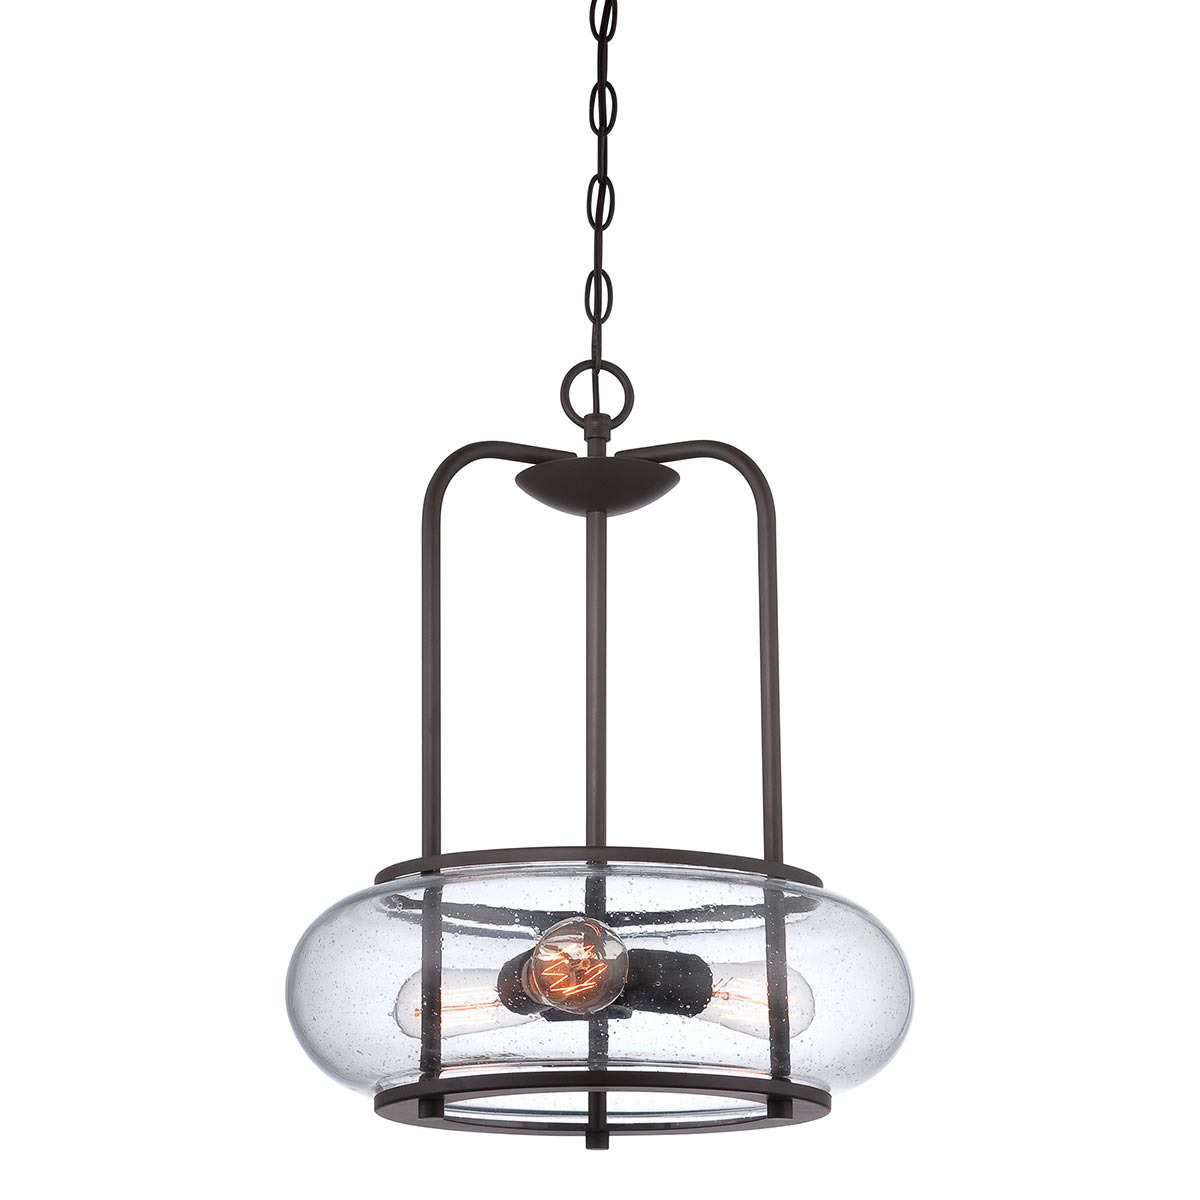 Quoizel Trilogy 3 Light Ceiling Pendant Old Bronze Seeded Glass Shade